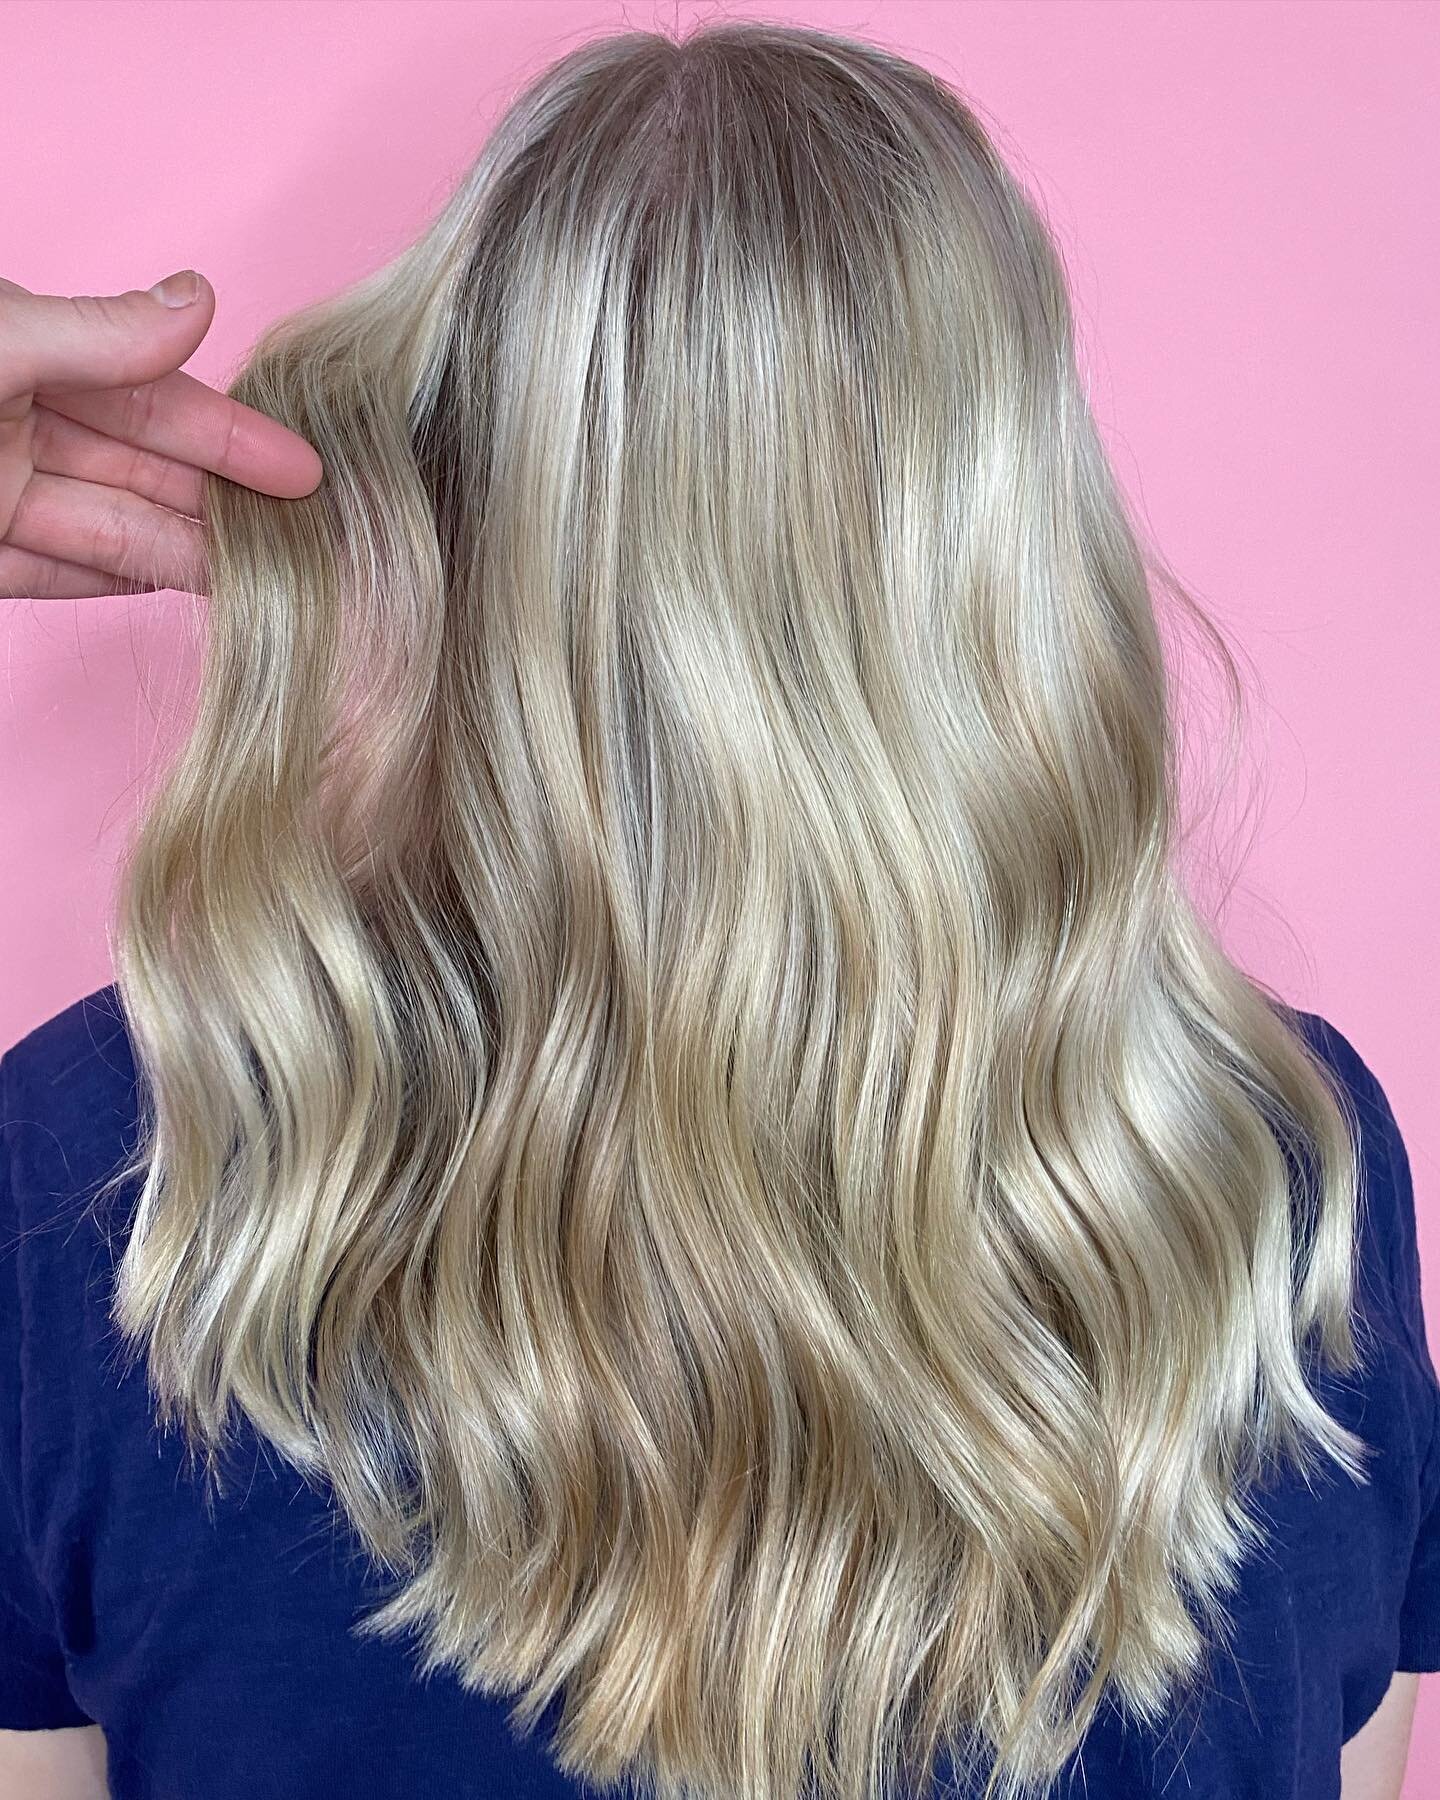 Blessing your feed with some blendy blonde goodness 🤍
&bull;
&bull;
&bull;

#stlhairstylist #stlhair #stlhairsalon #stlstylist #stlextensions #stlblondingspecialist #stlreels #hairreels #haireducation #hairstylistreels #hairstylist #behindthechair #